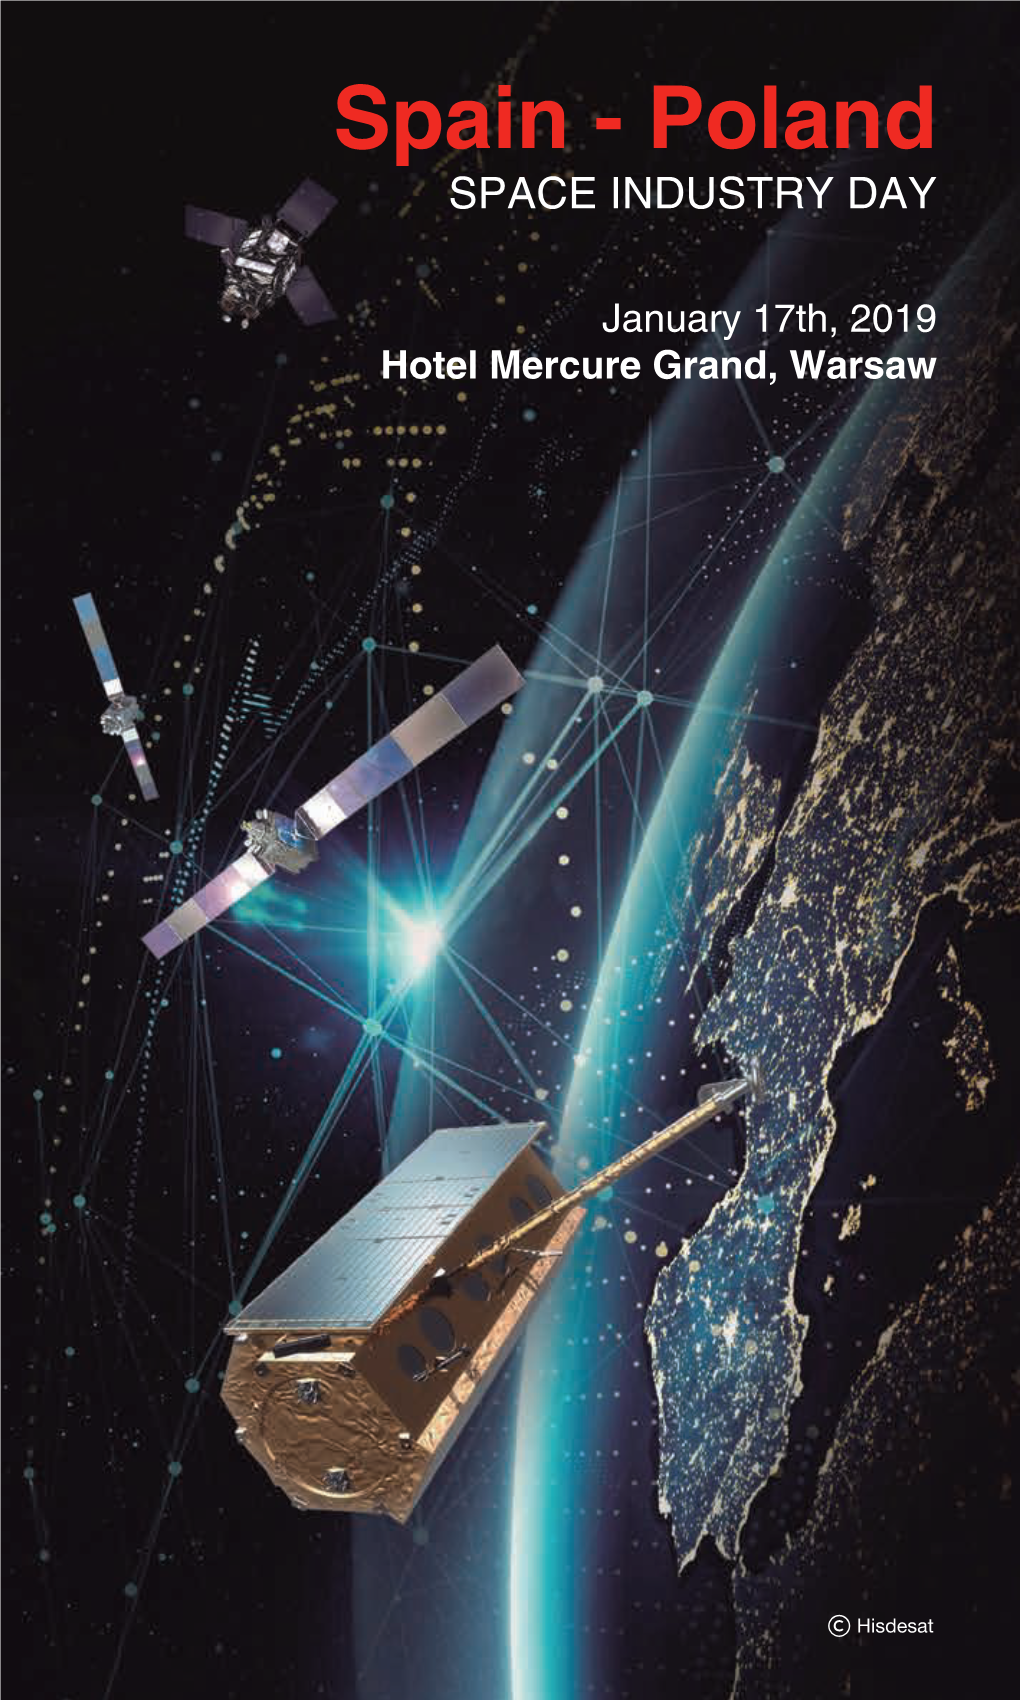 Spain - Poland SPACE INDUSTRY DAY